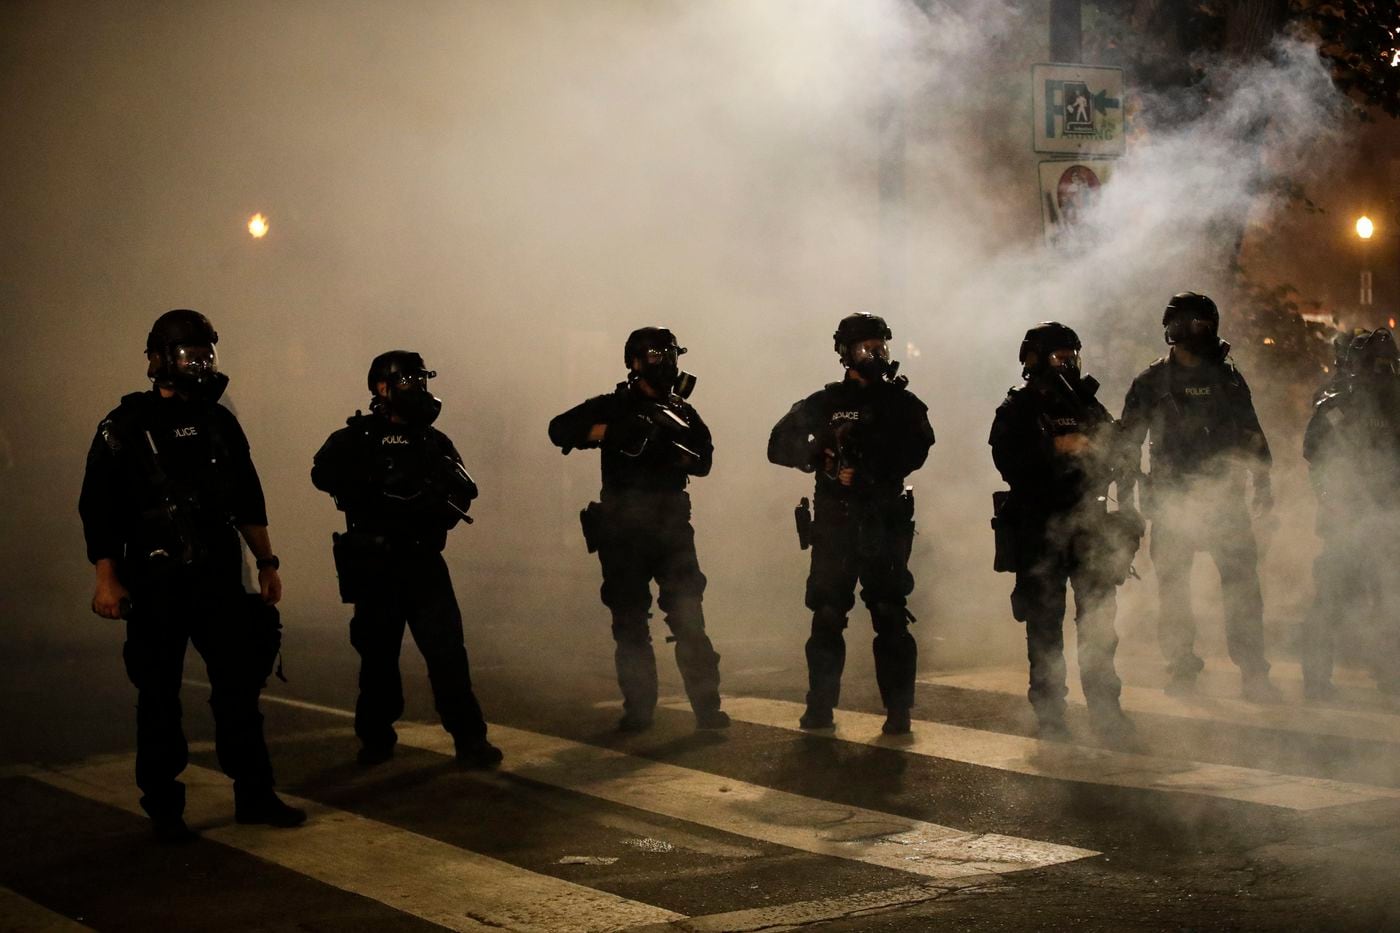 Federal officers are surrounded by smoke as they push back demonstrators during a Black Lives Matter protest at the Mark O. Hatfield United States Courthouse Wednesday in Portland, Ore.